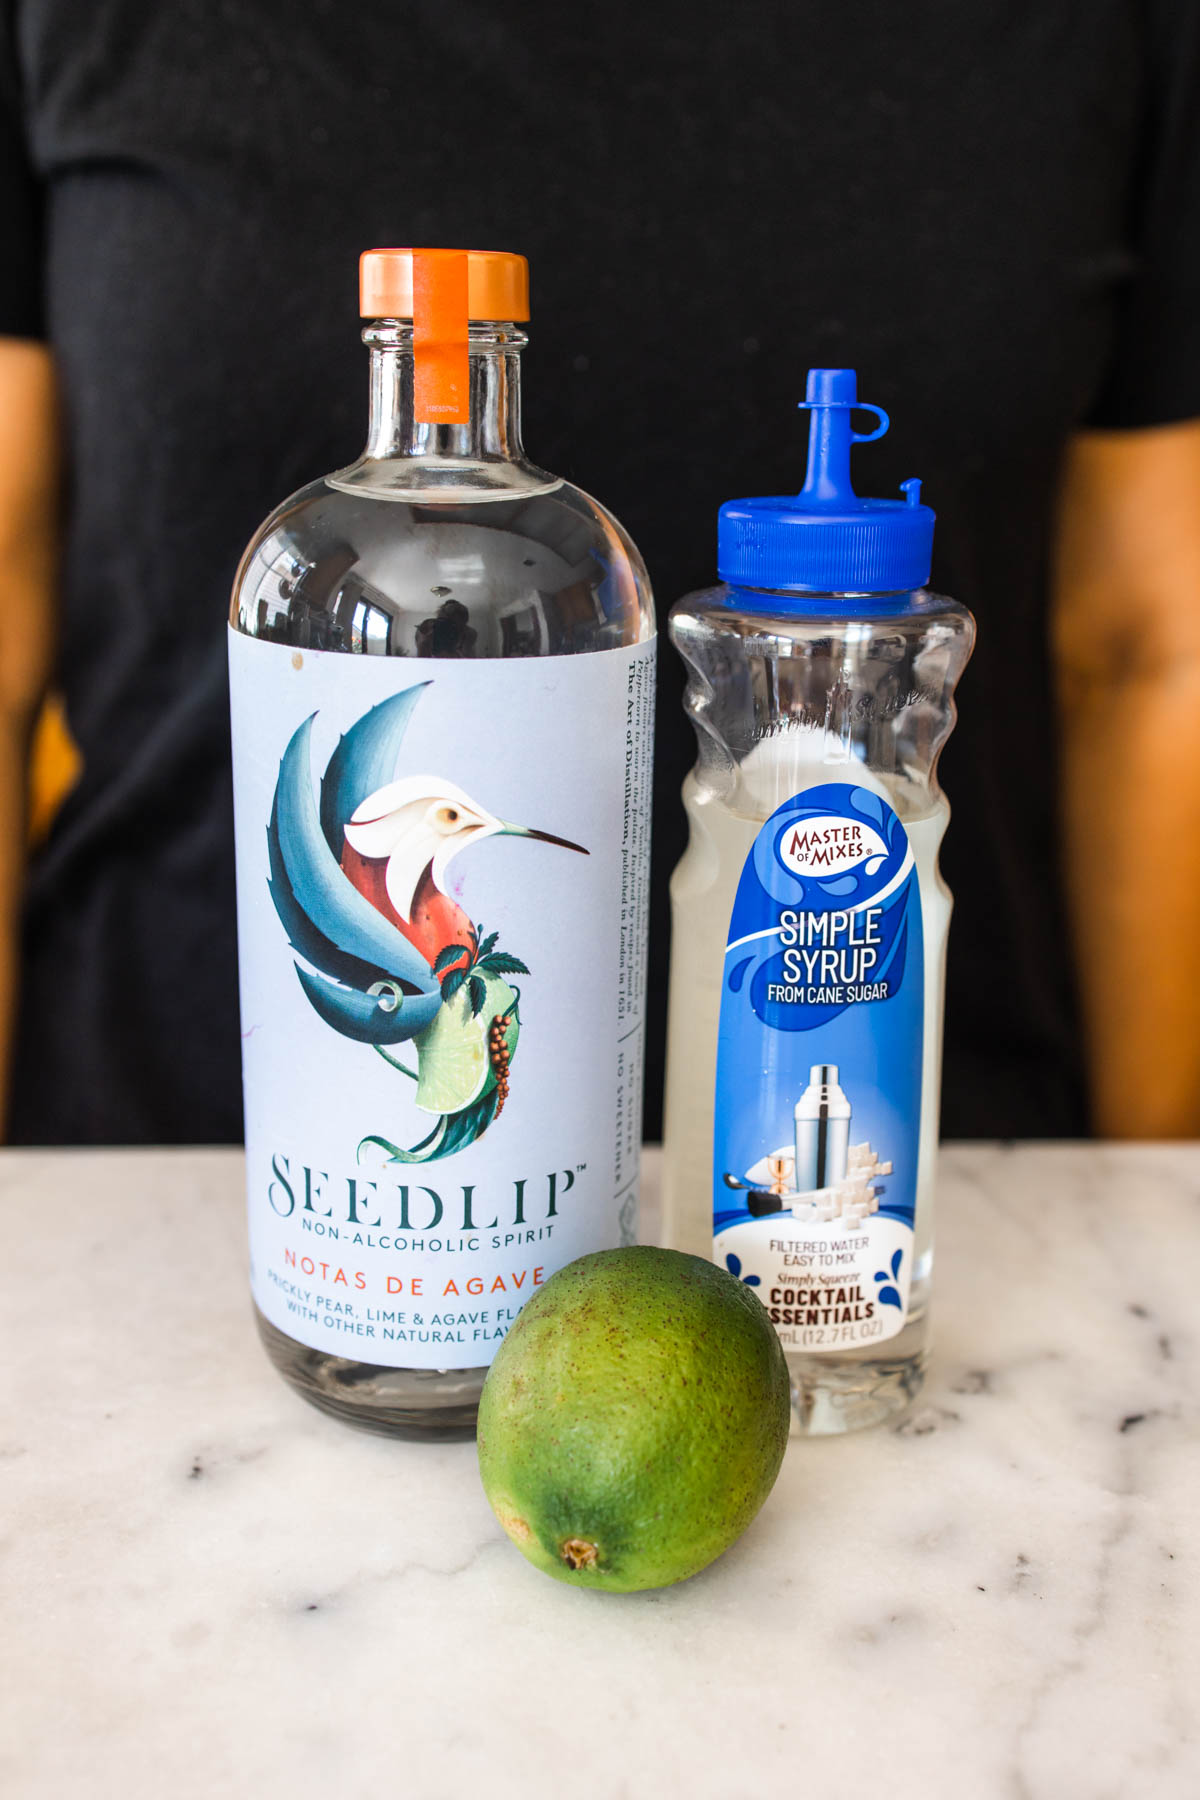 A bottle of Seedlip Notas de Agave beside a container of Master Mixes Simple Syrup with fresh lime in between them on top of a counter.